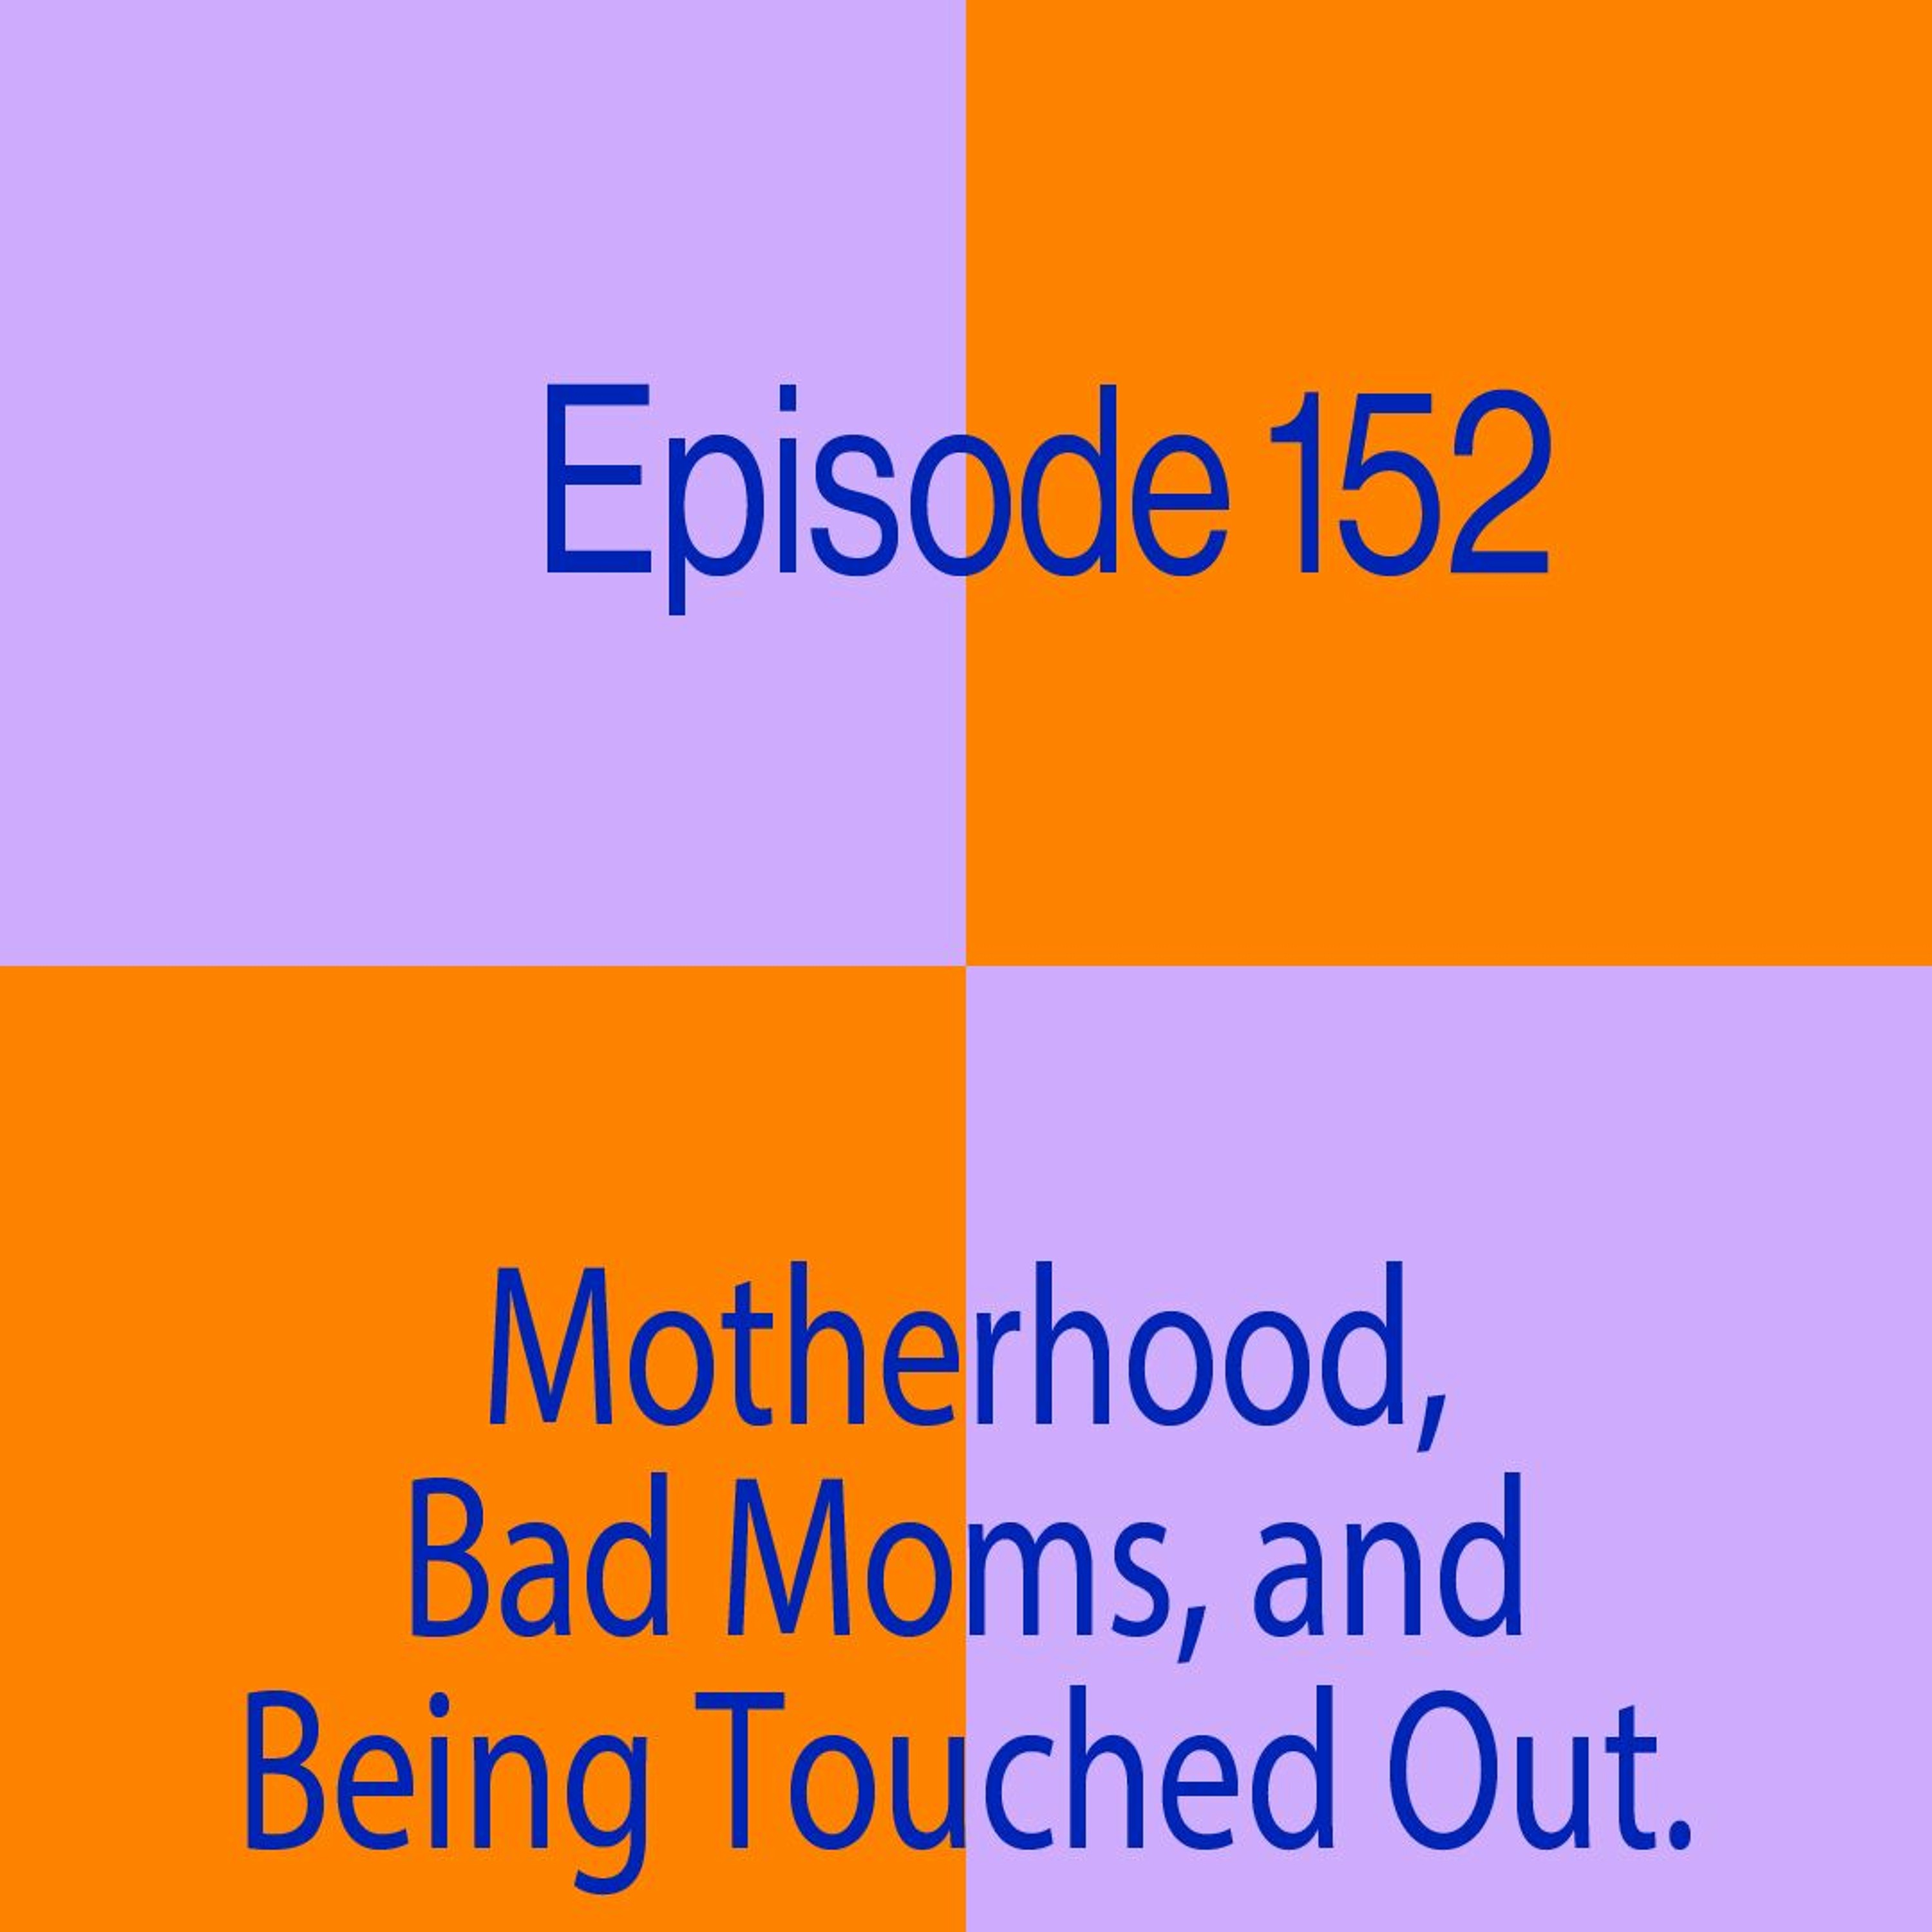 Episode 152: Motherhood, Bad Moms and Being Touched Out